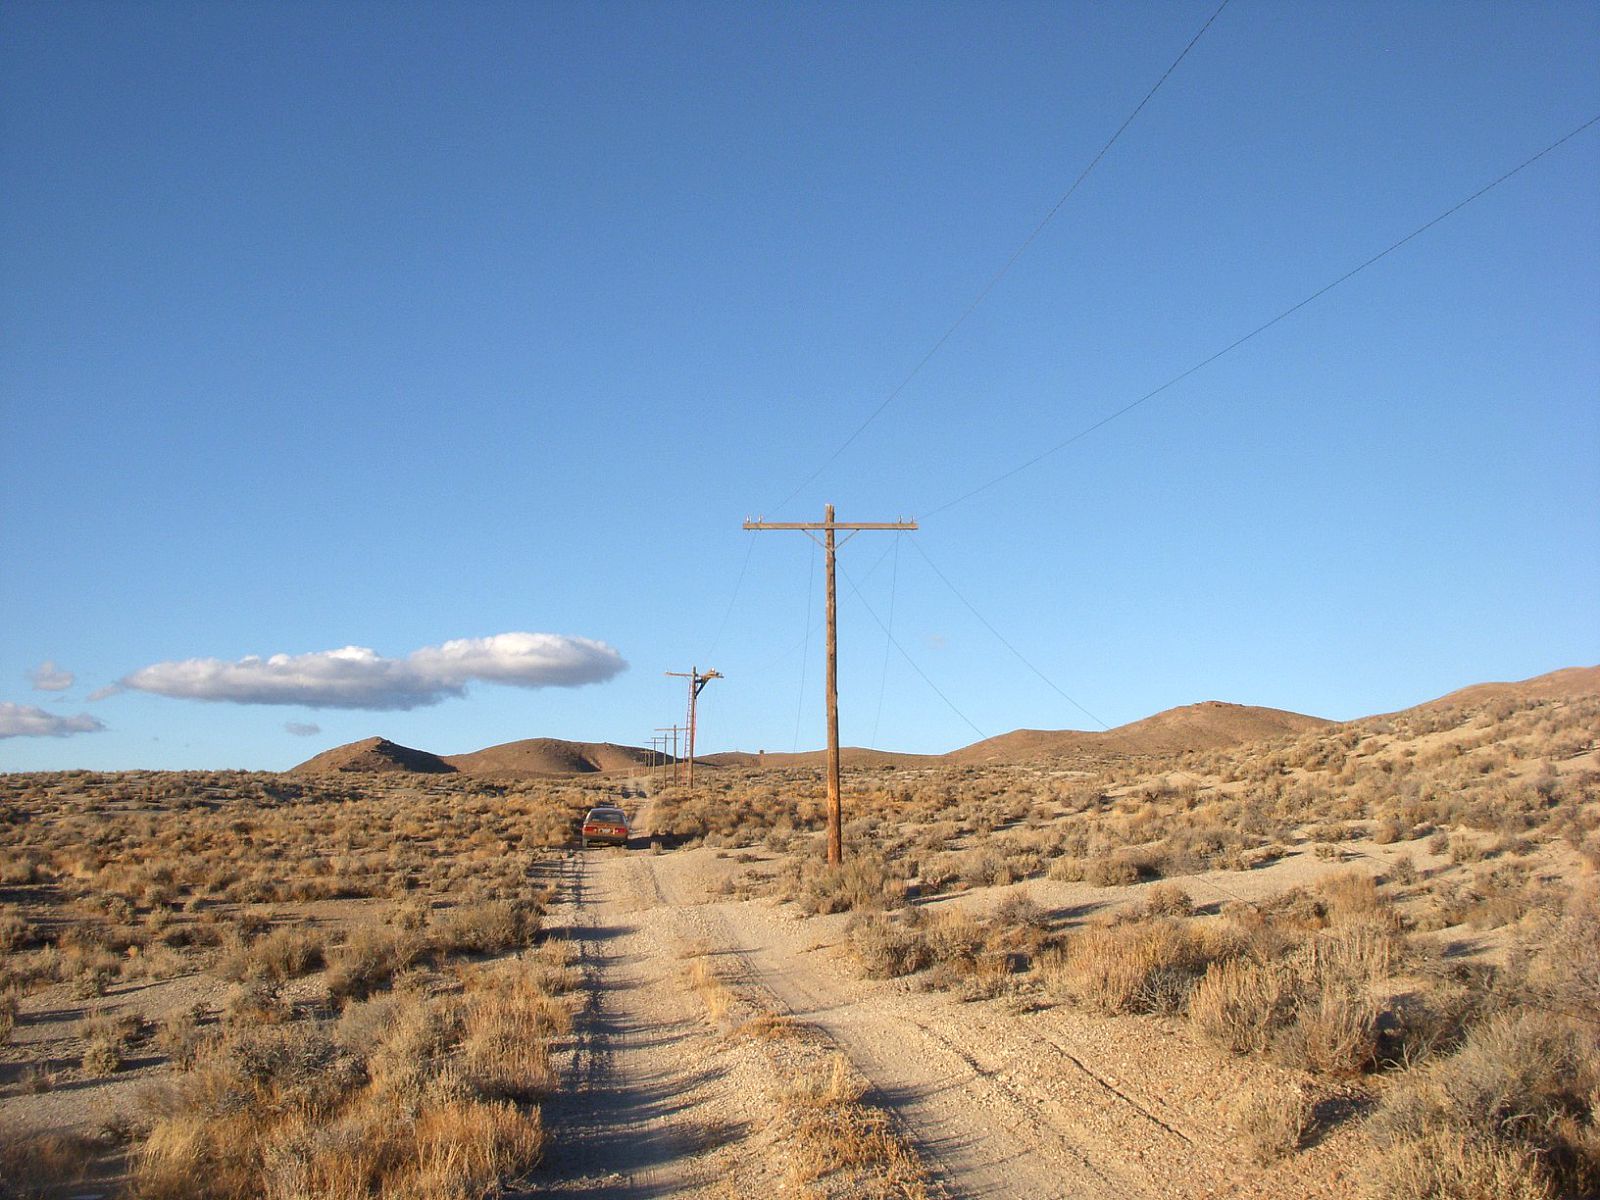 Stringing Line with Shack distant, center